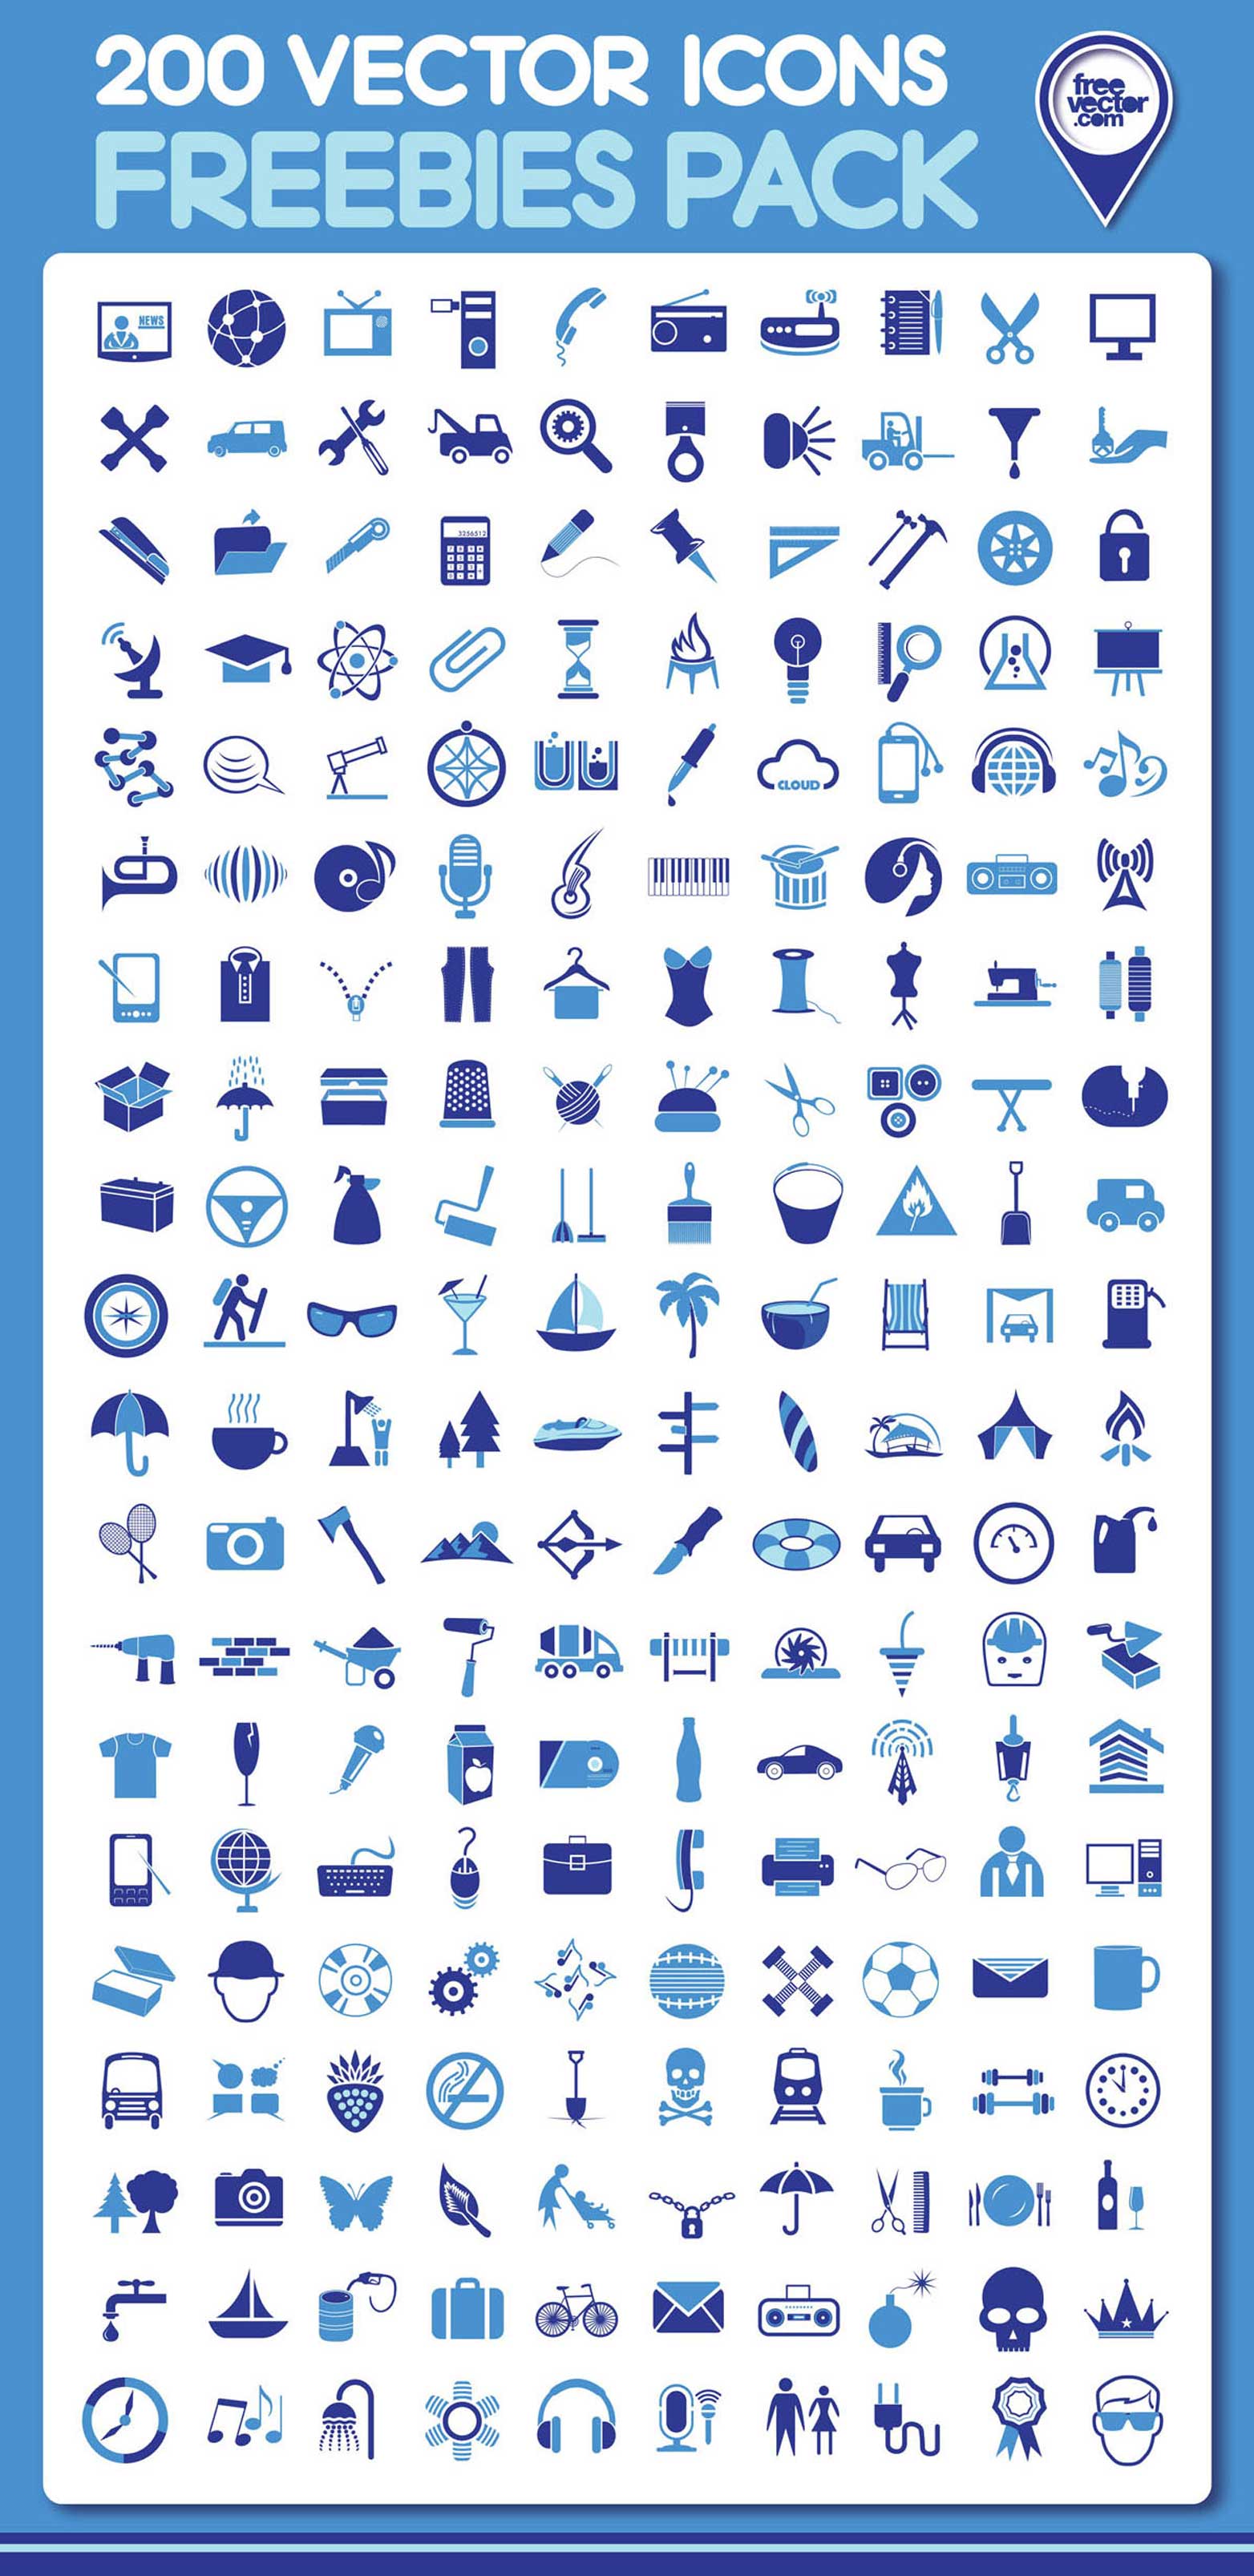 Icons Solid: Free 100 Vector Icons | friebeArt | Icon Library | Icons 